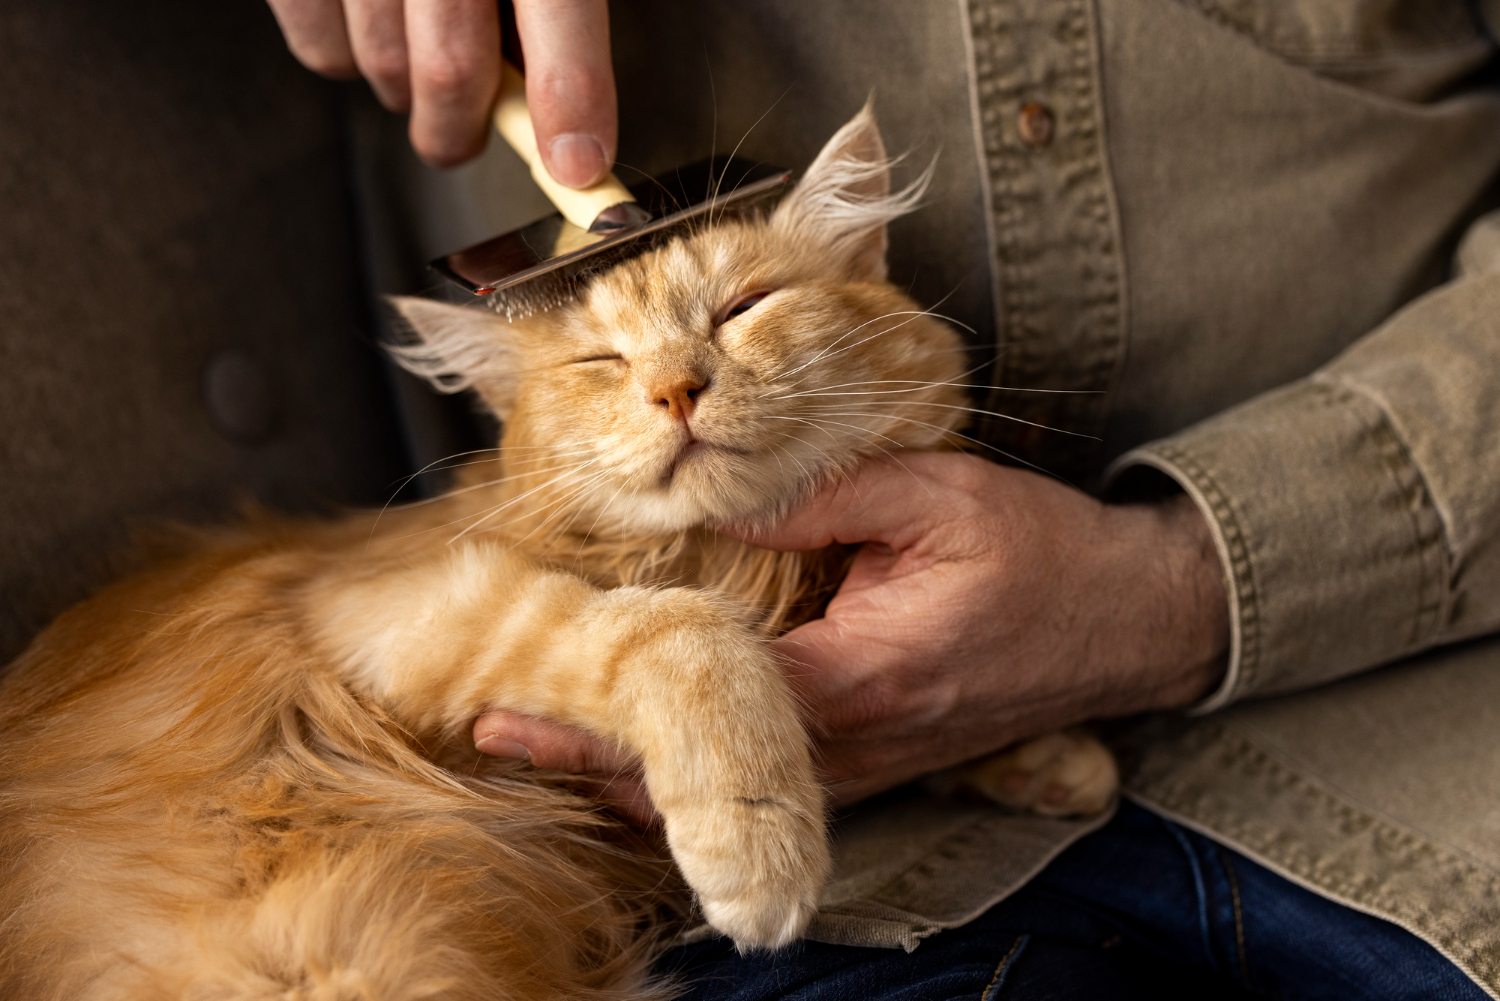 What Grooming Practices Can Improve My Cat's Fur